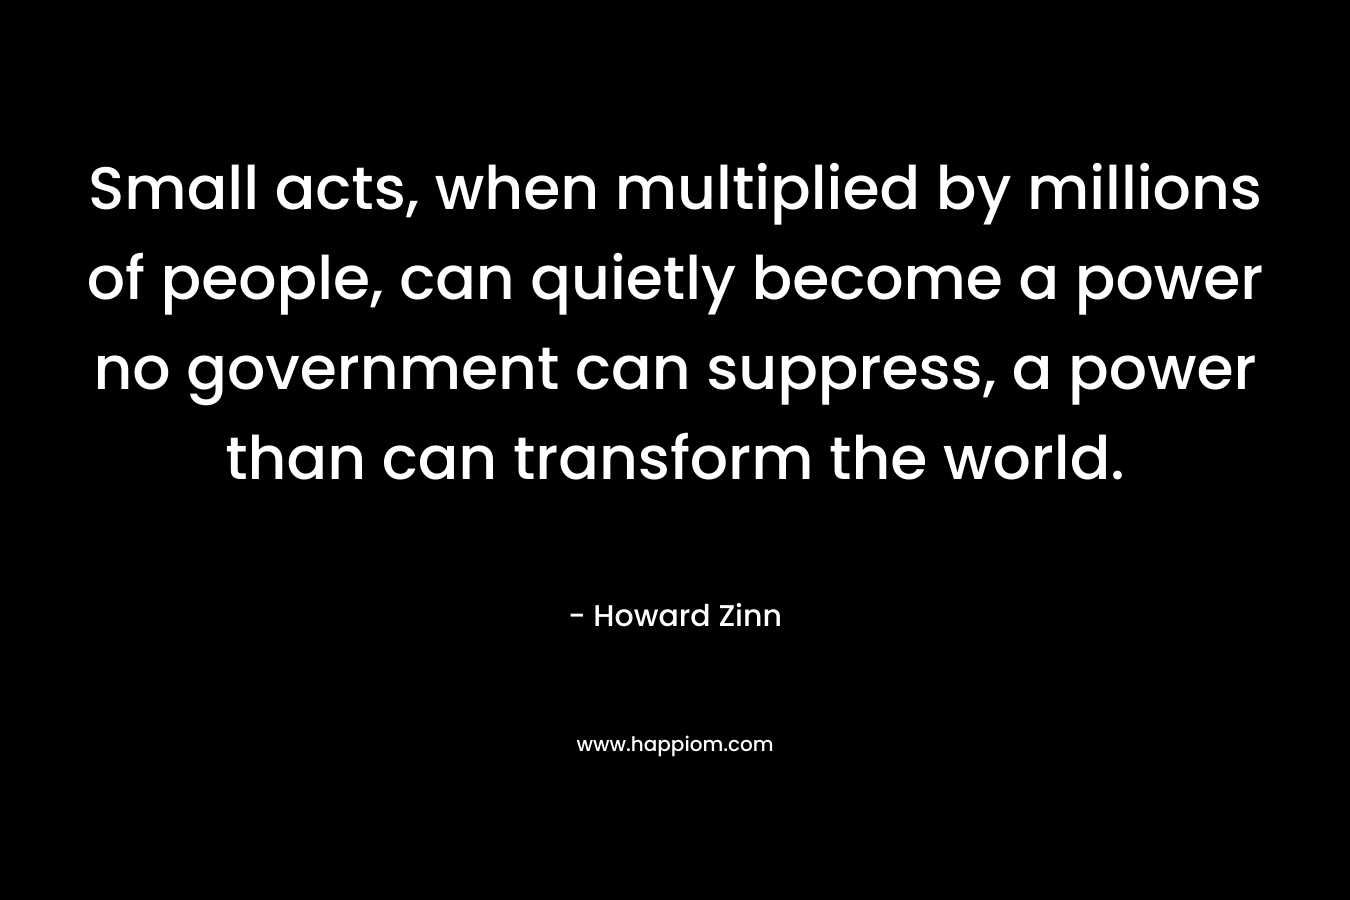 Small acts, when multiplied by millions of people, can quietly become a power no government can suppress, a power than can transform the world.